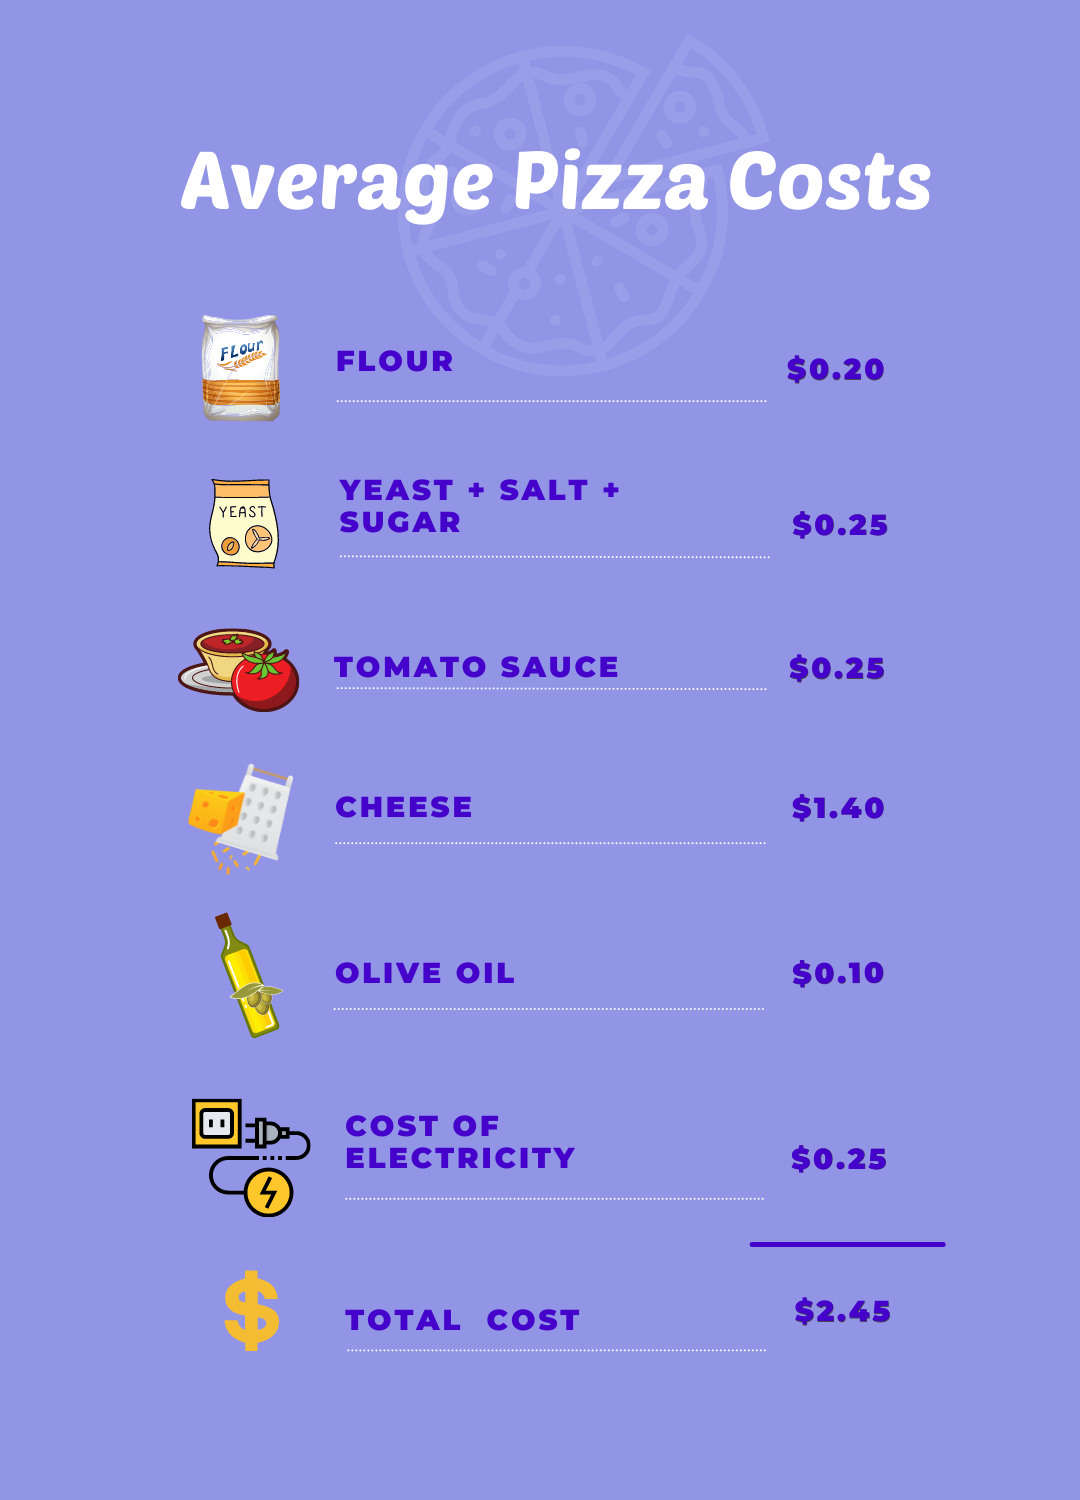 Average pizza costs infographic